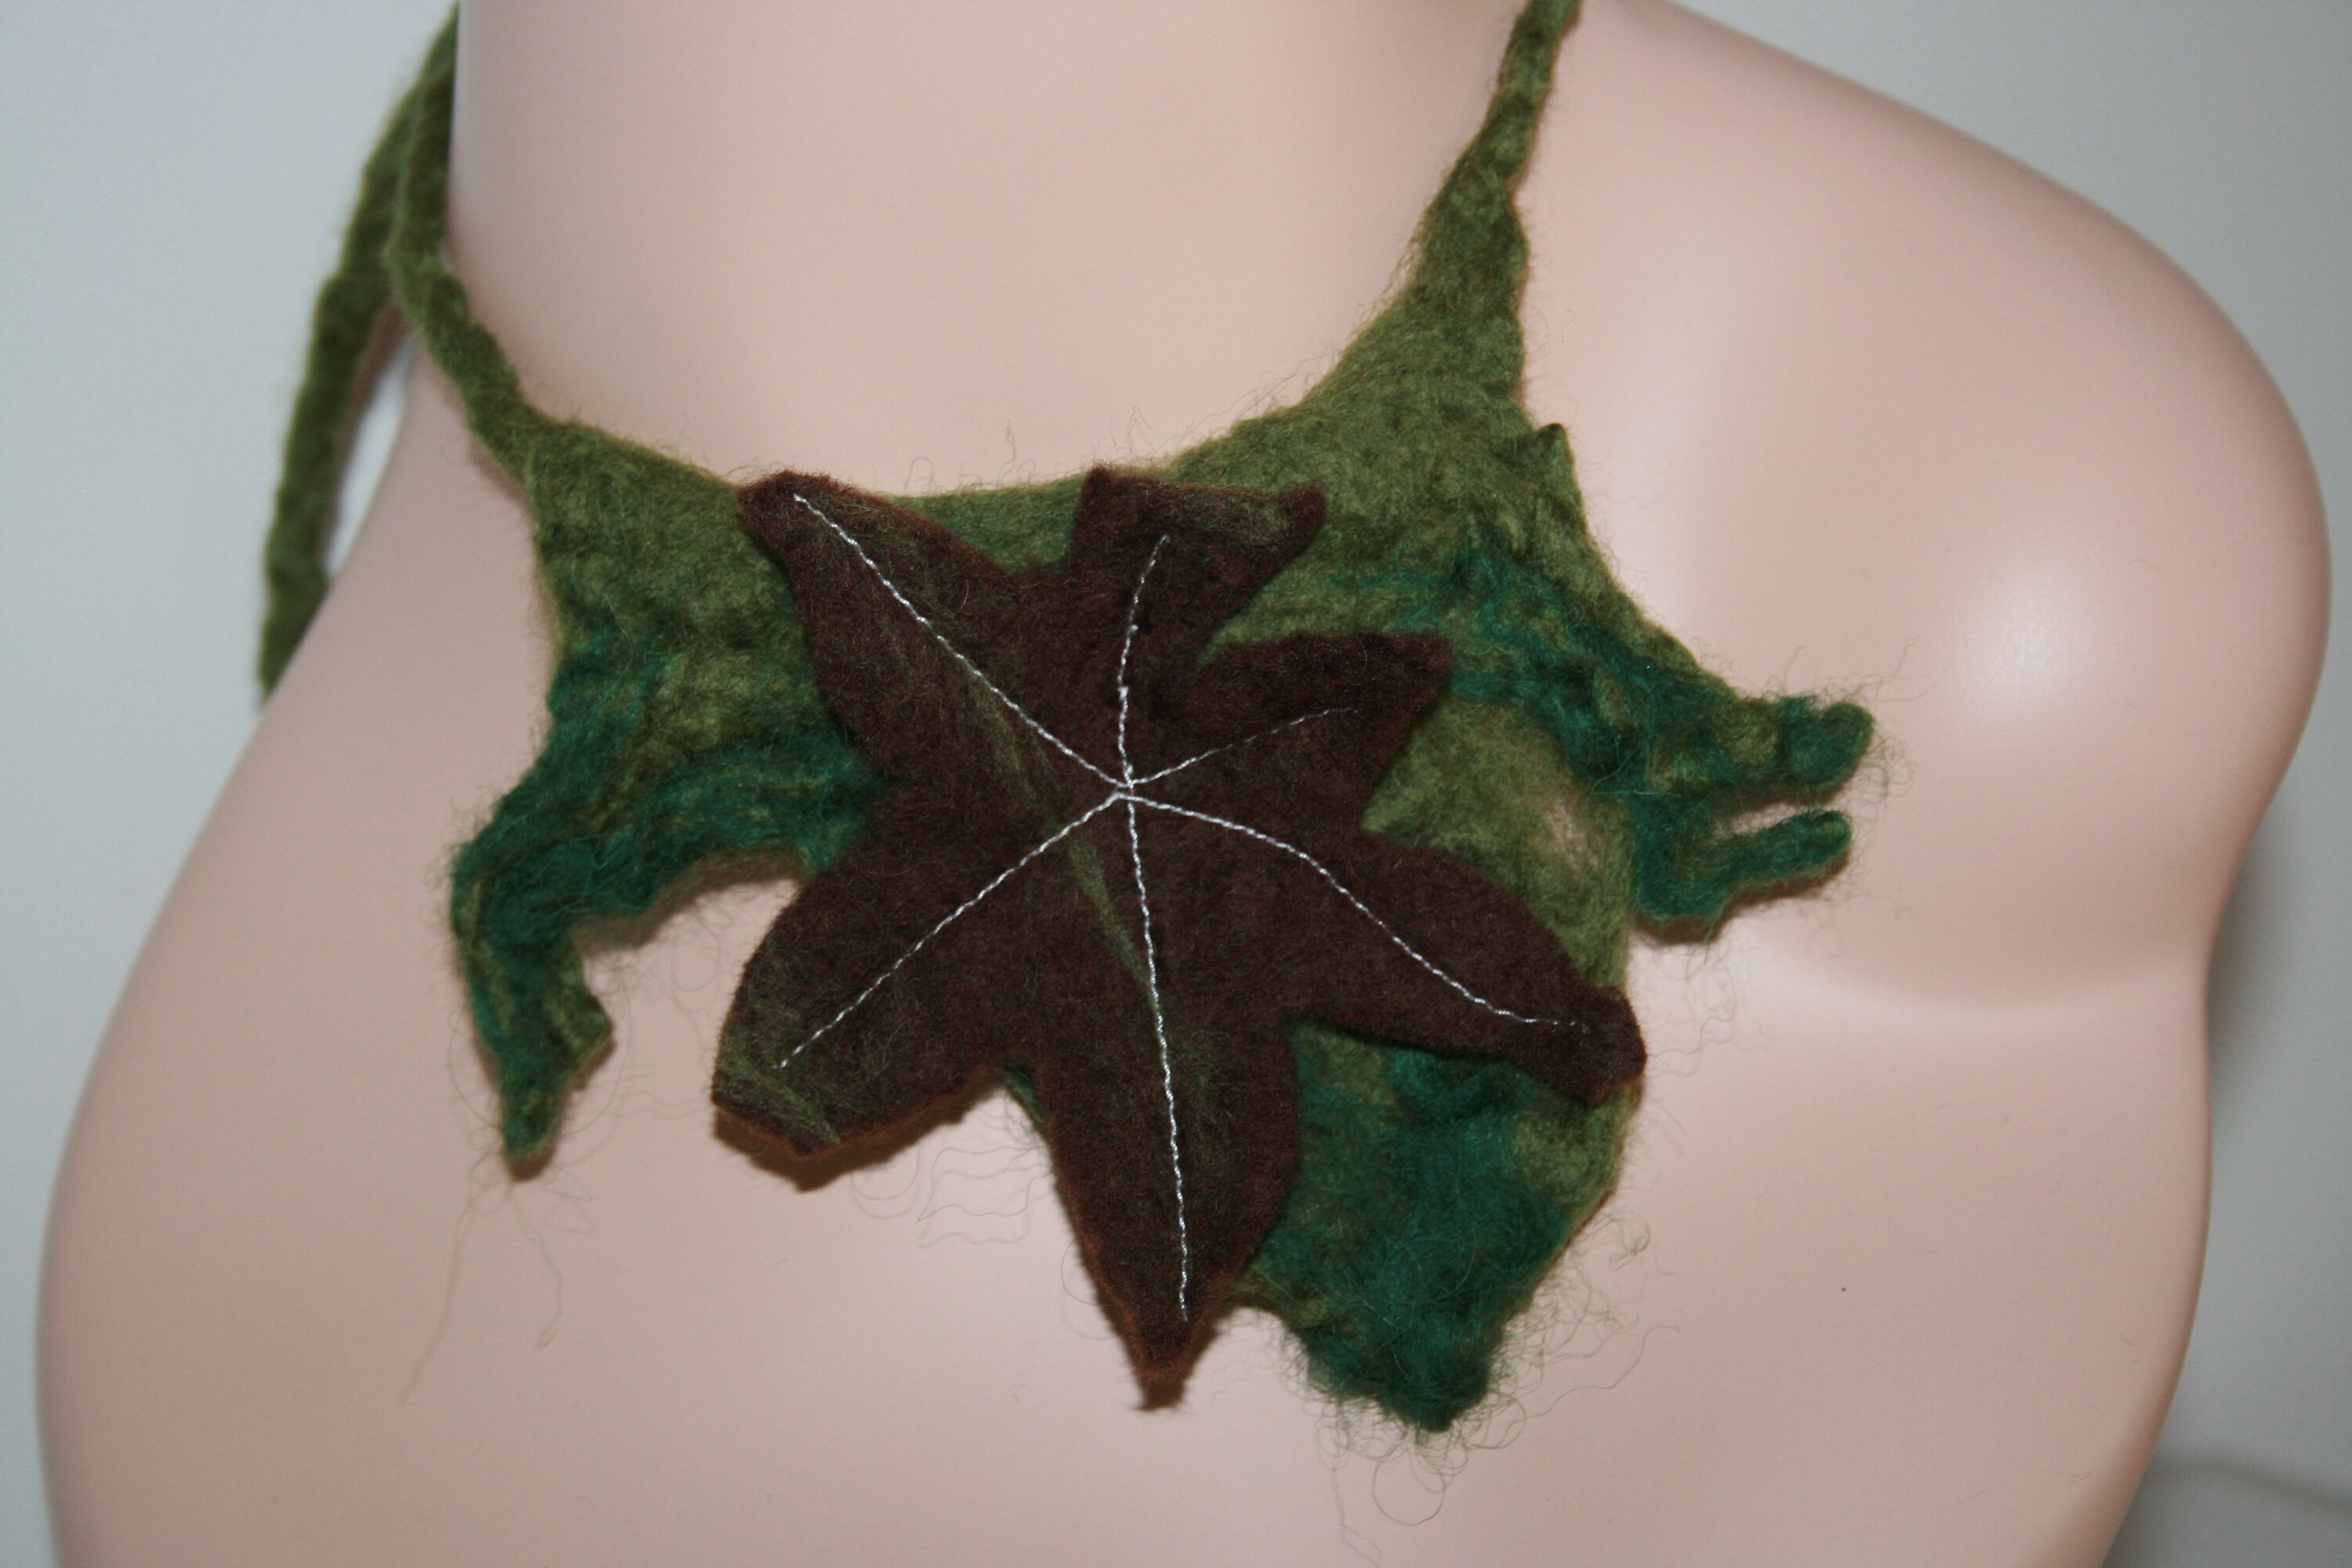 Wet Felted Tree Leaf ScarfShawl. Soft Merino Wool Brown Earthy Felted Forest Neck Warmer Ties up at back green tones